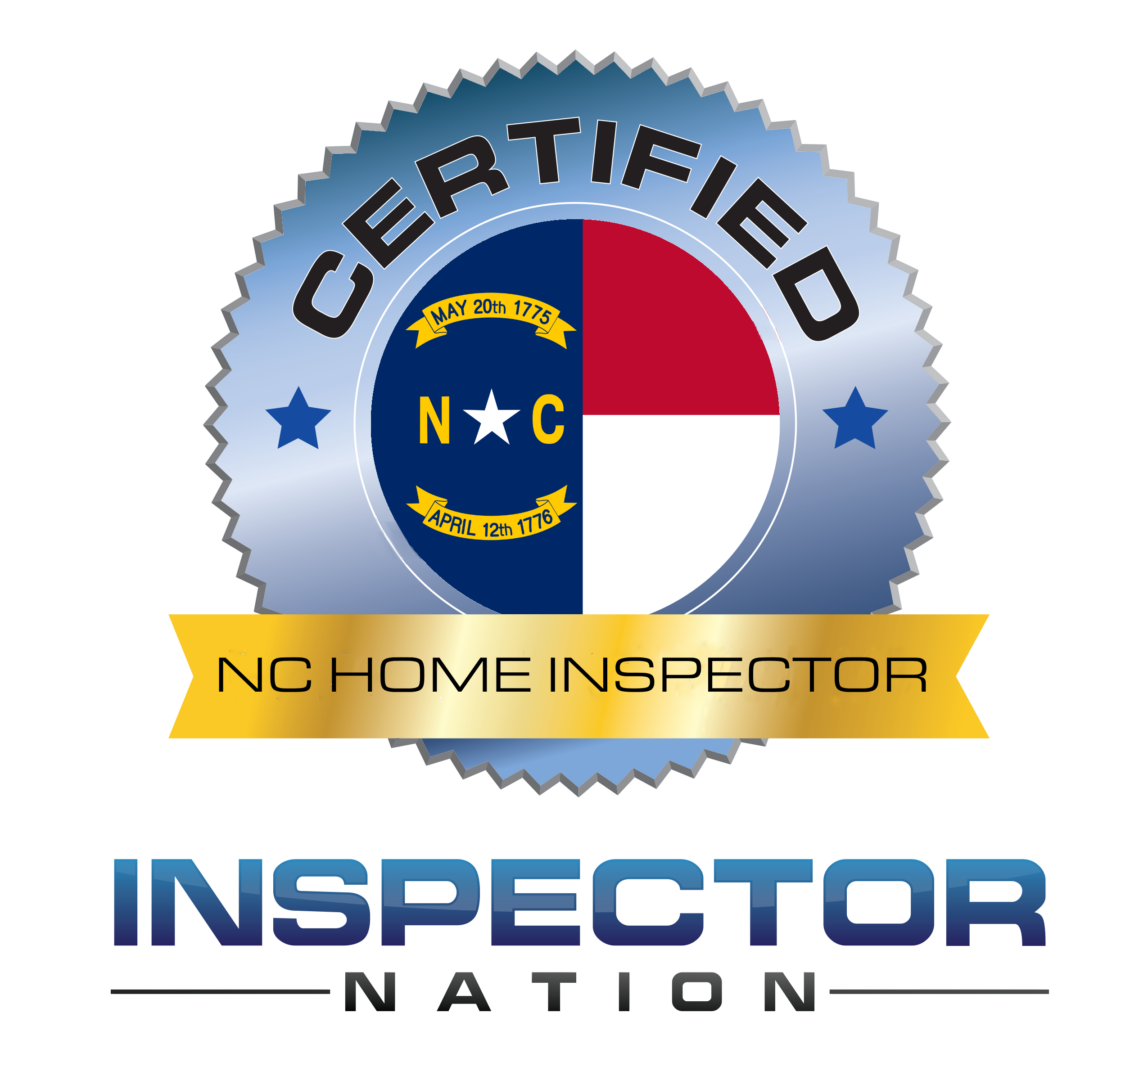 Patriot Home Inspection Services